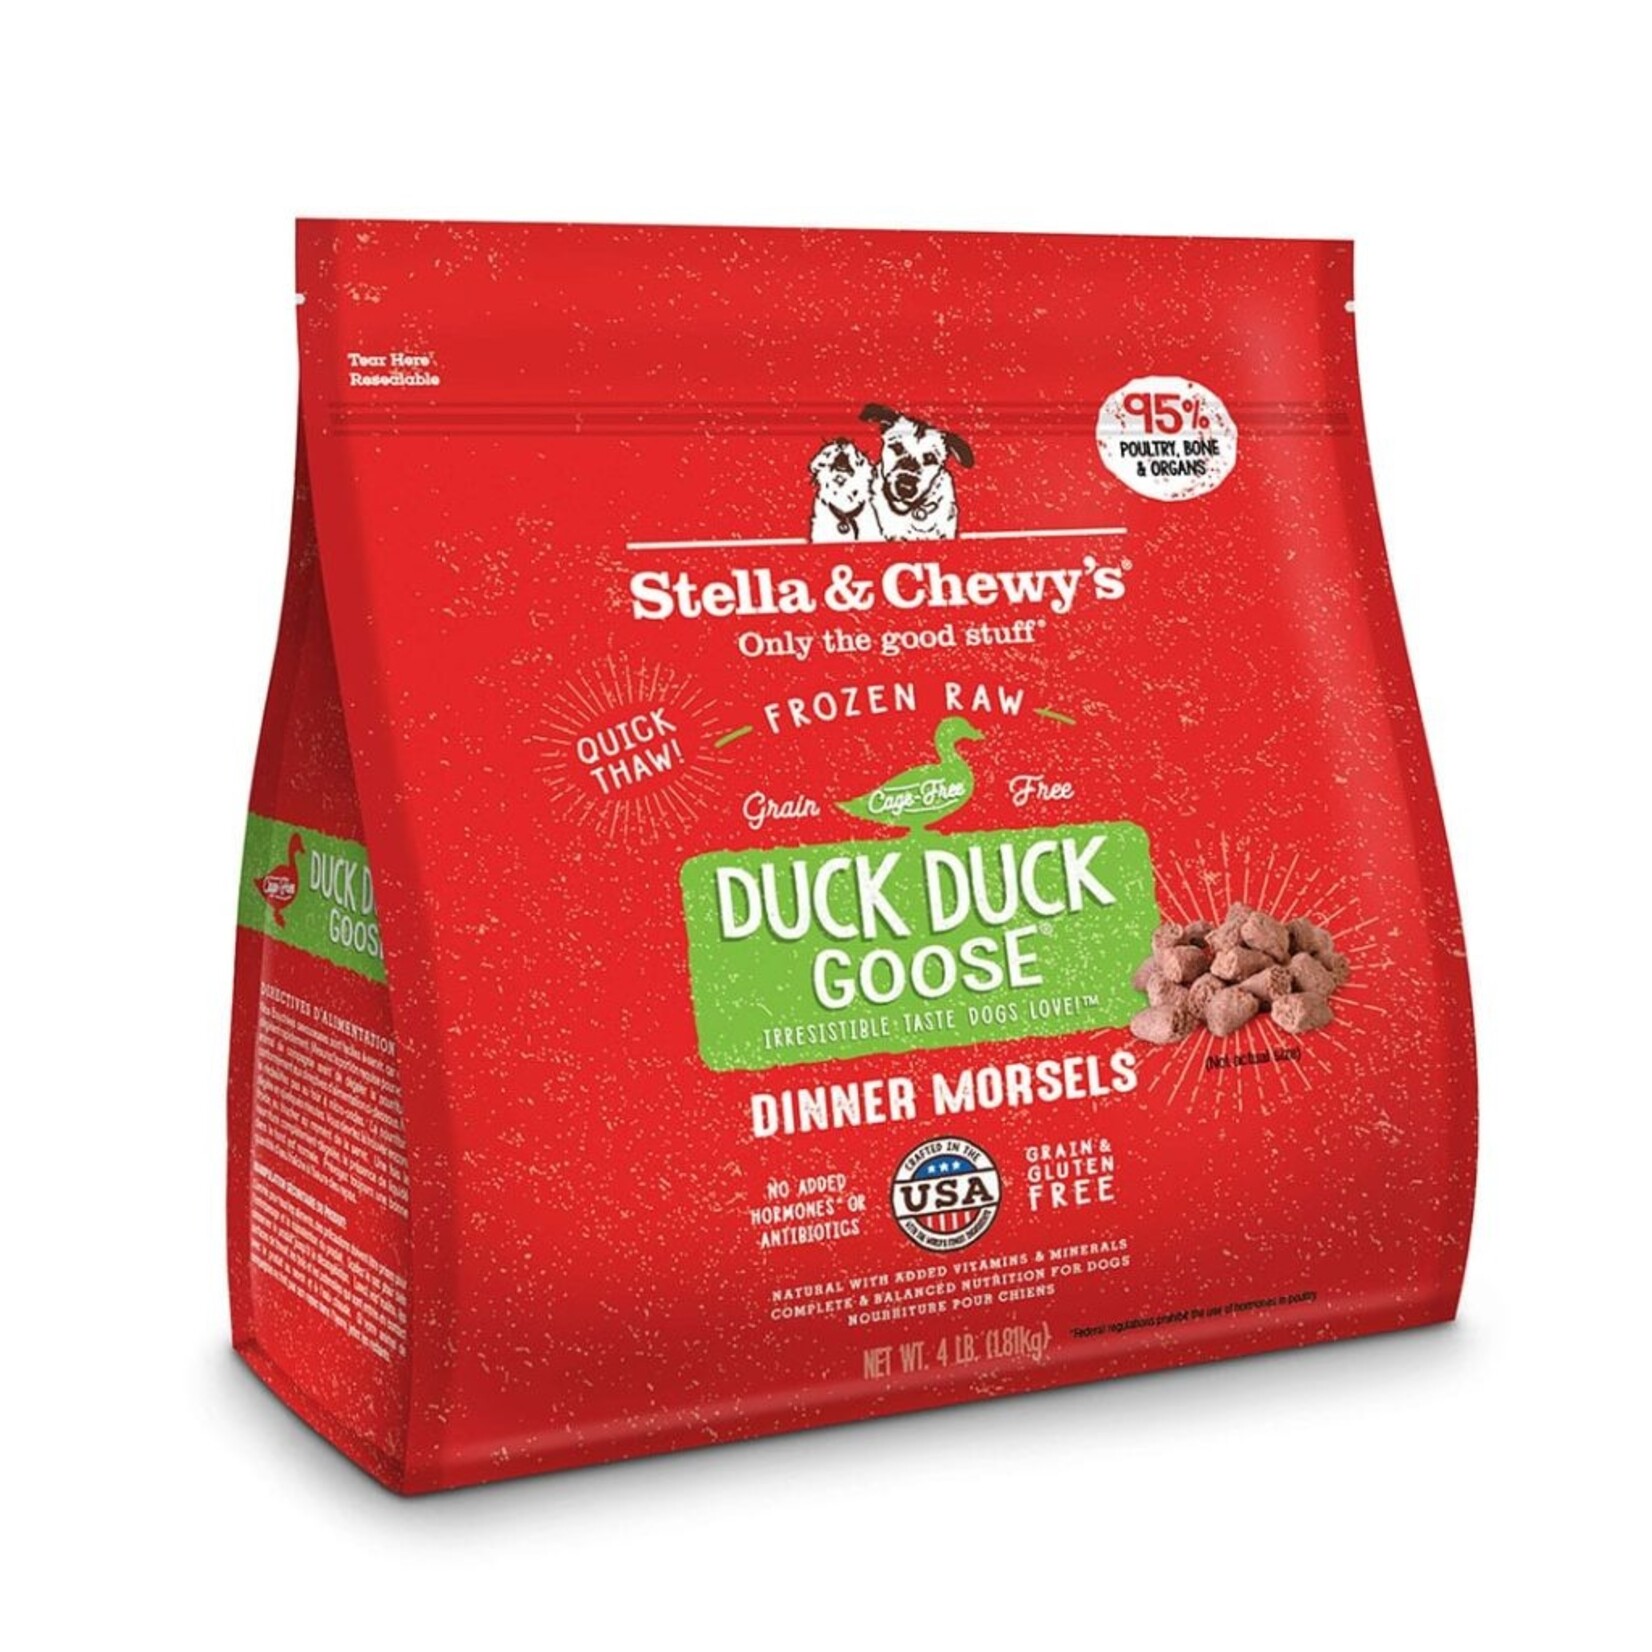 Stella & Chewy's Duck Duck Goose - Raw Frozen - Patties or Morsels - Stella & Chewy's